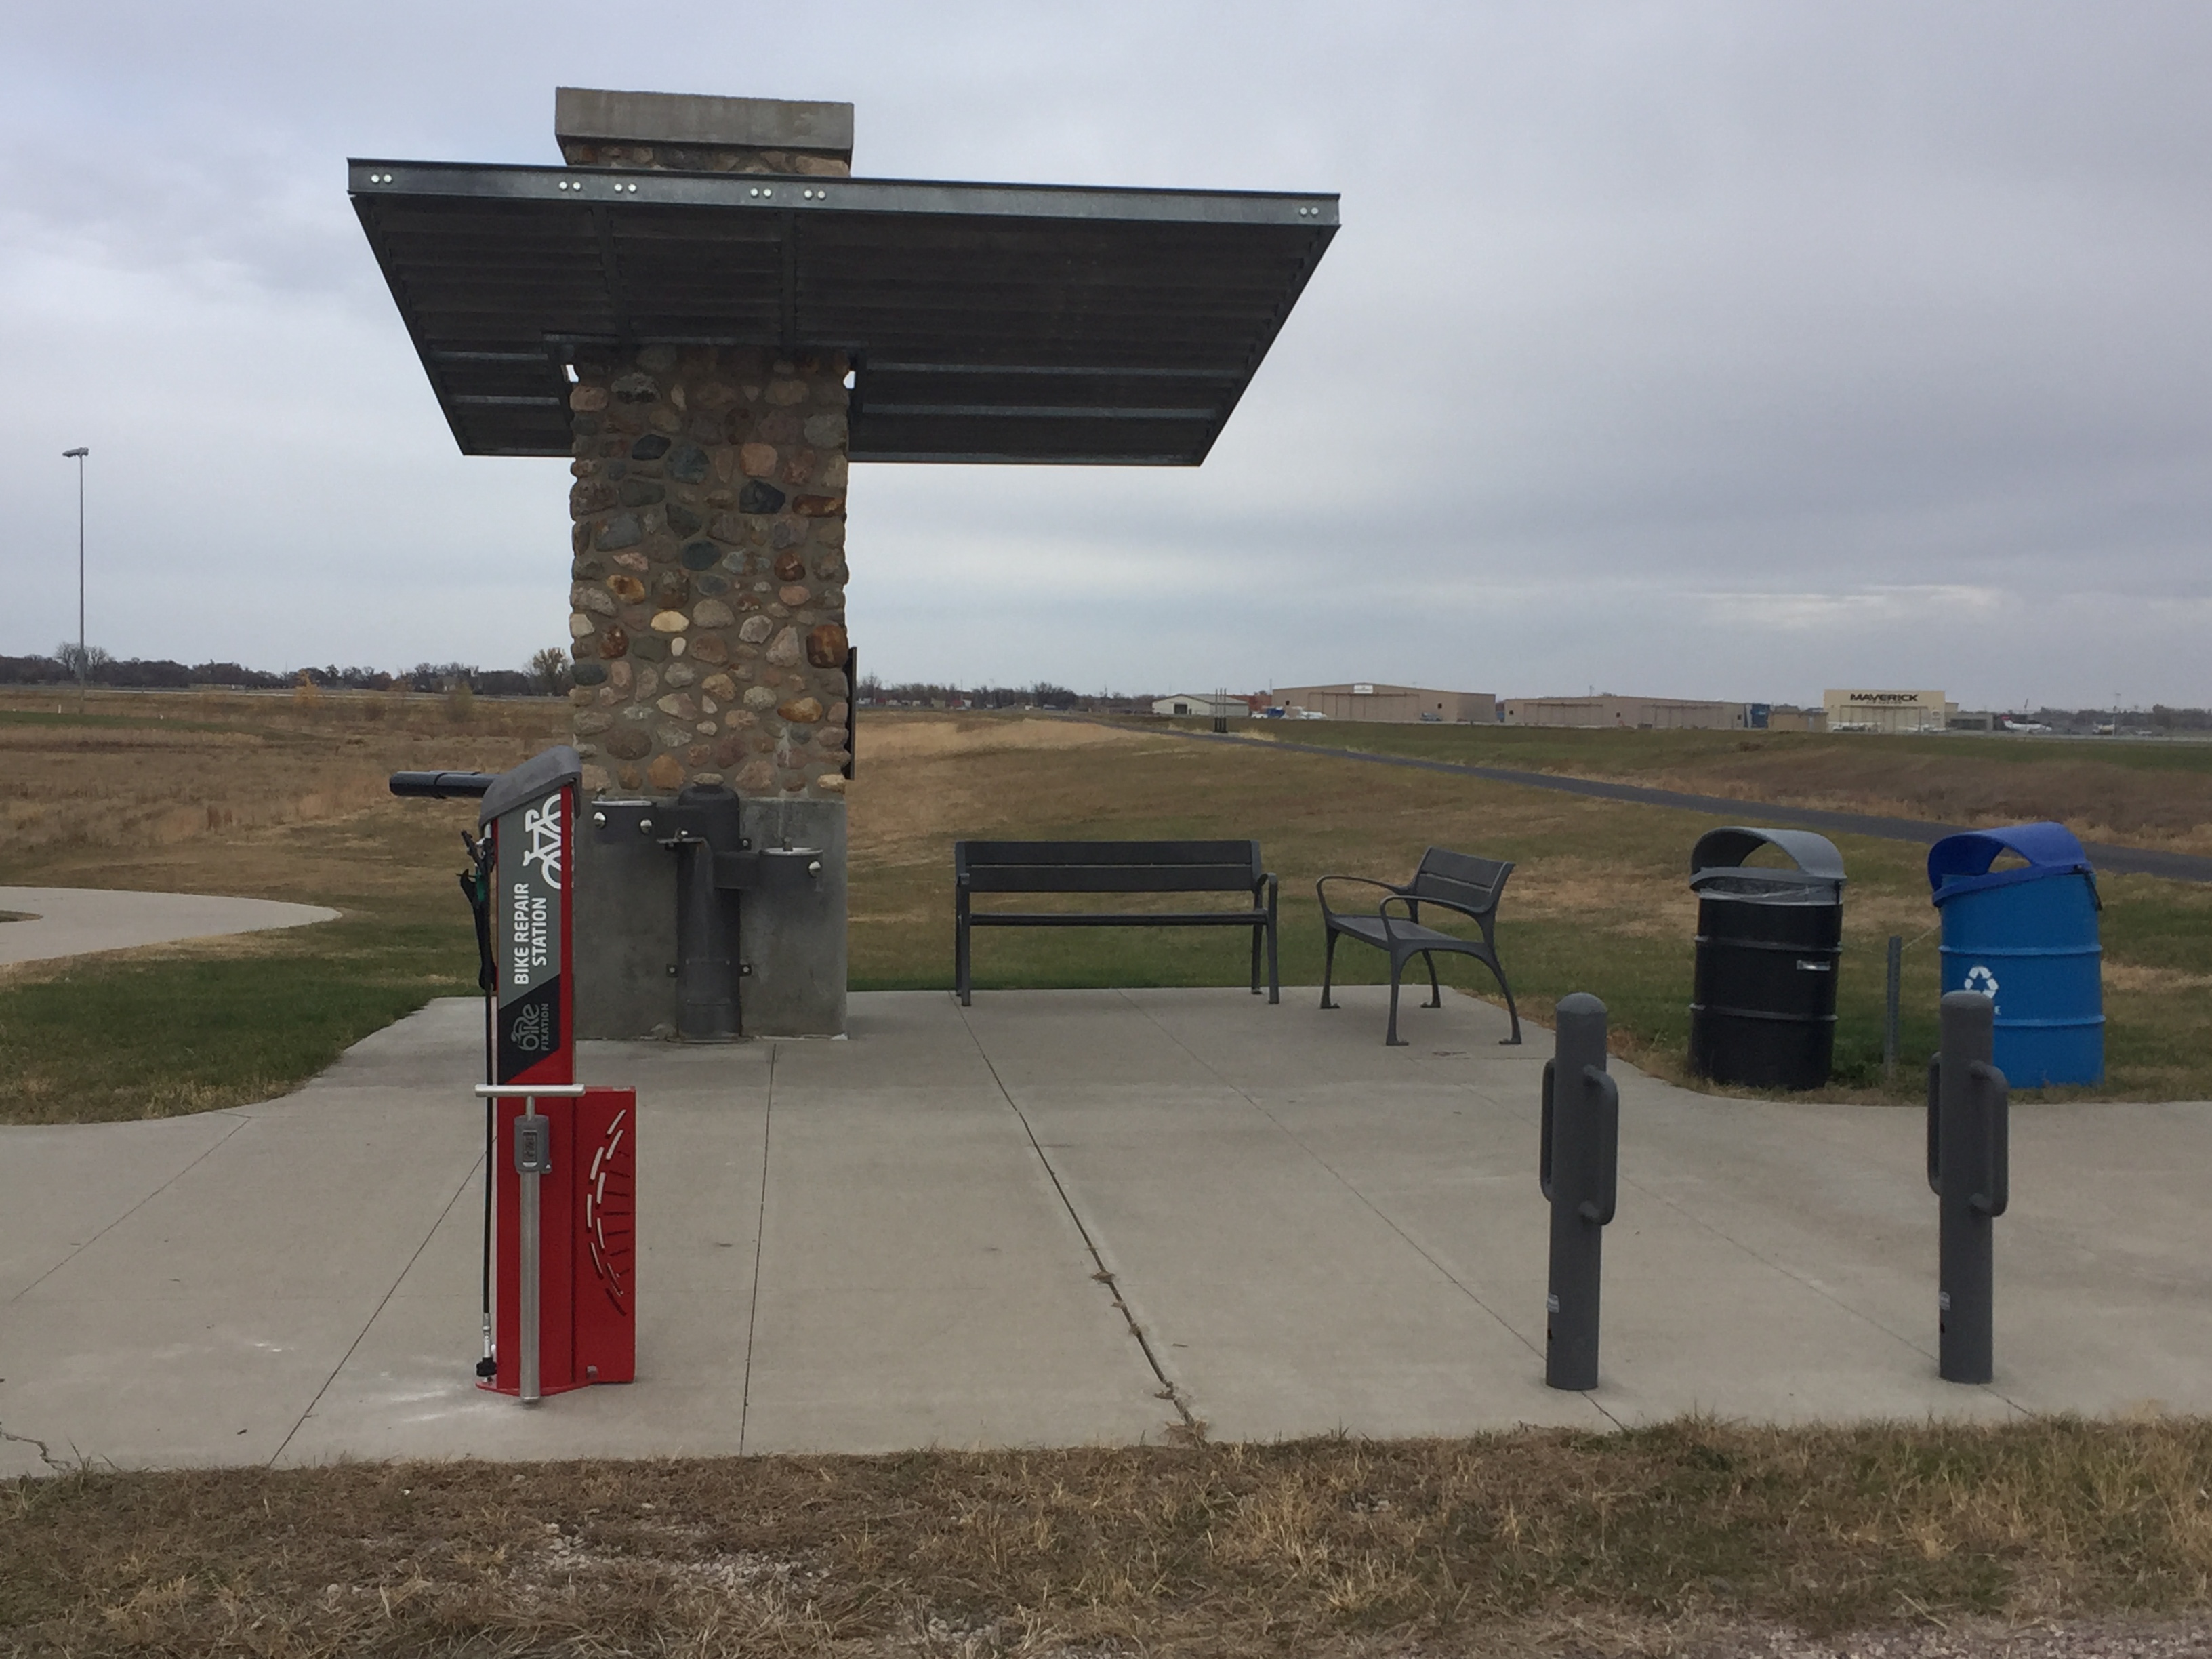 picture of a red bike maintenance station on the Sioux Falls Bike Trail.